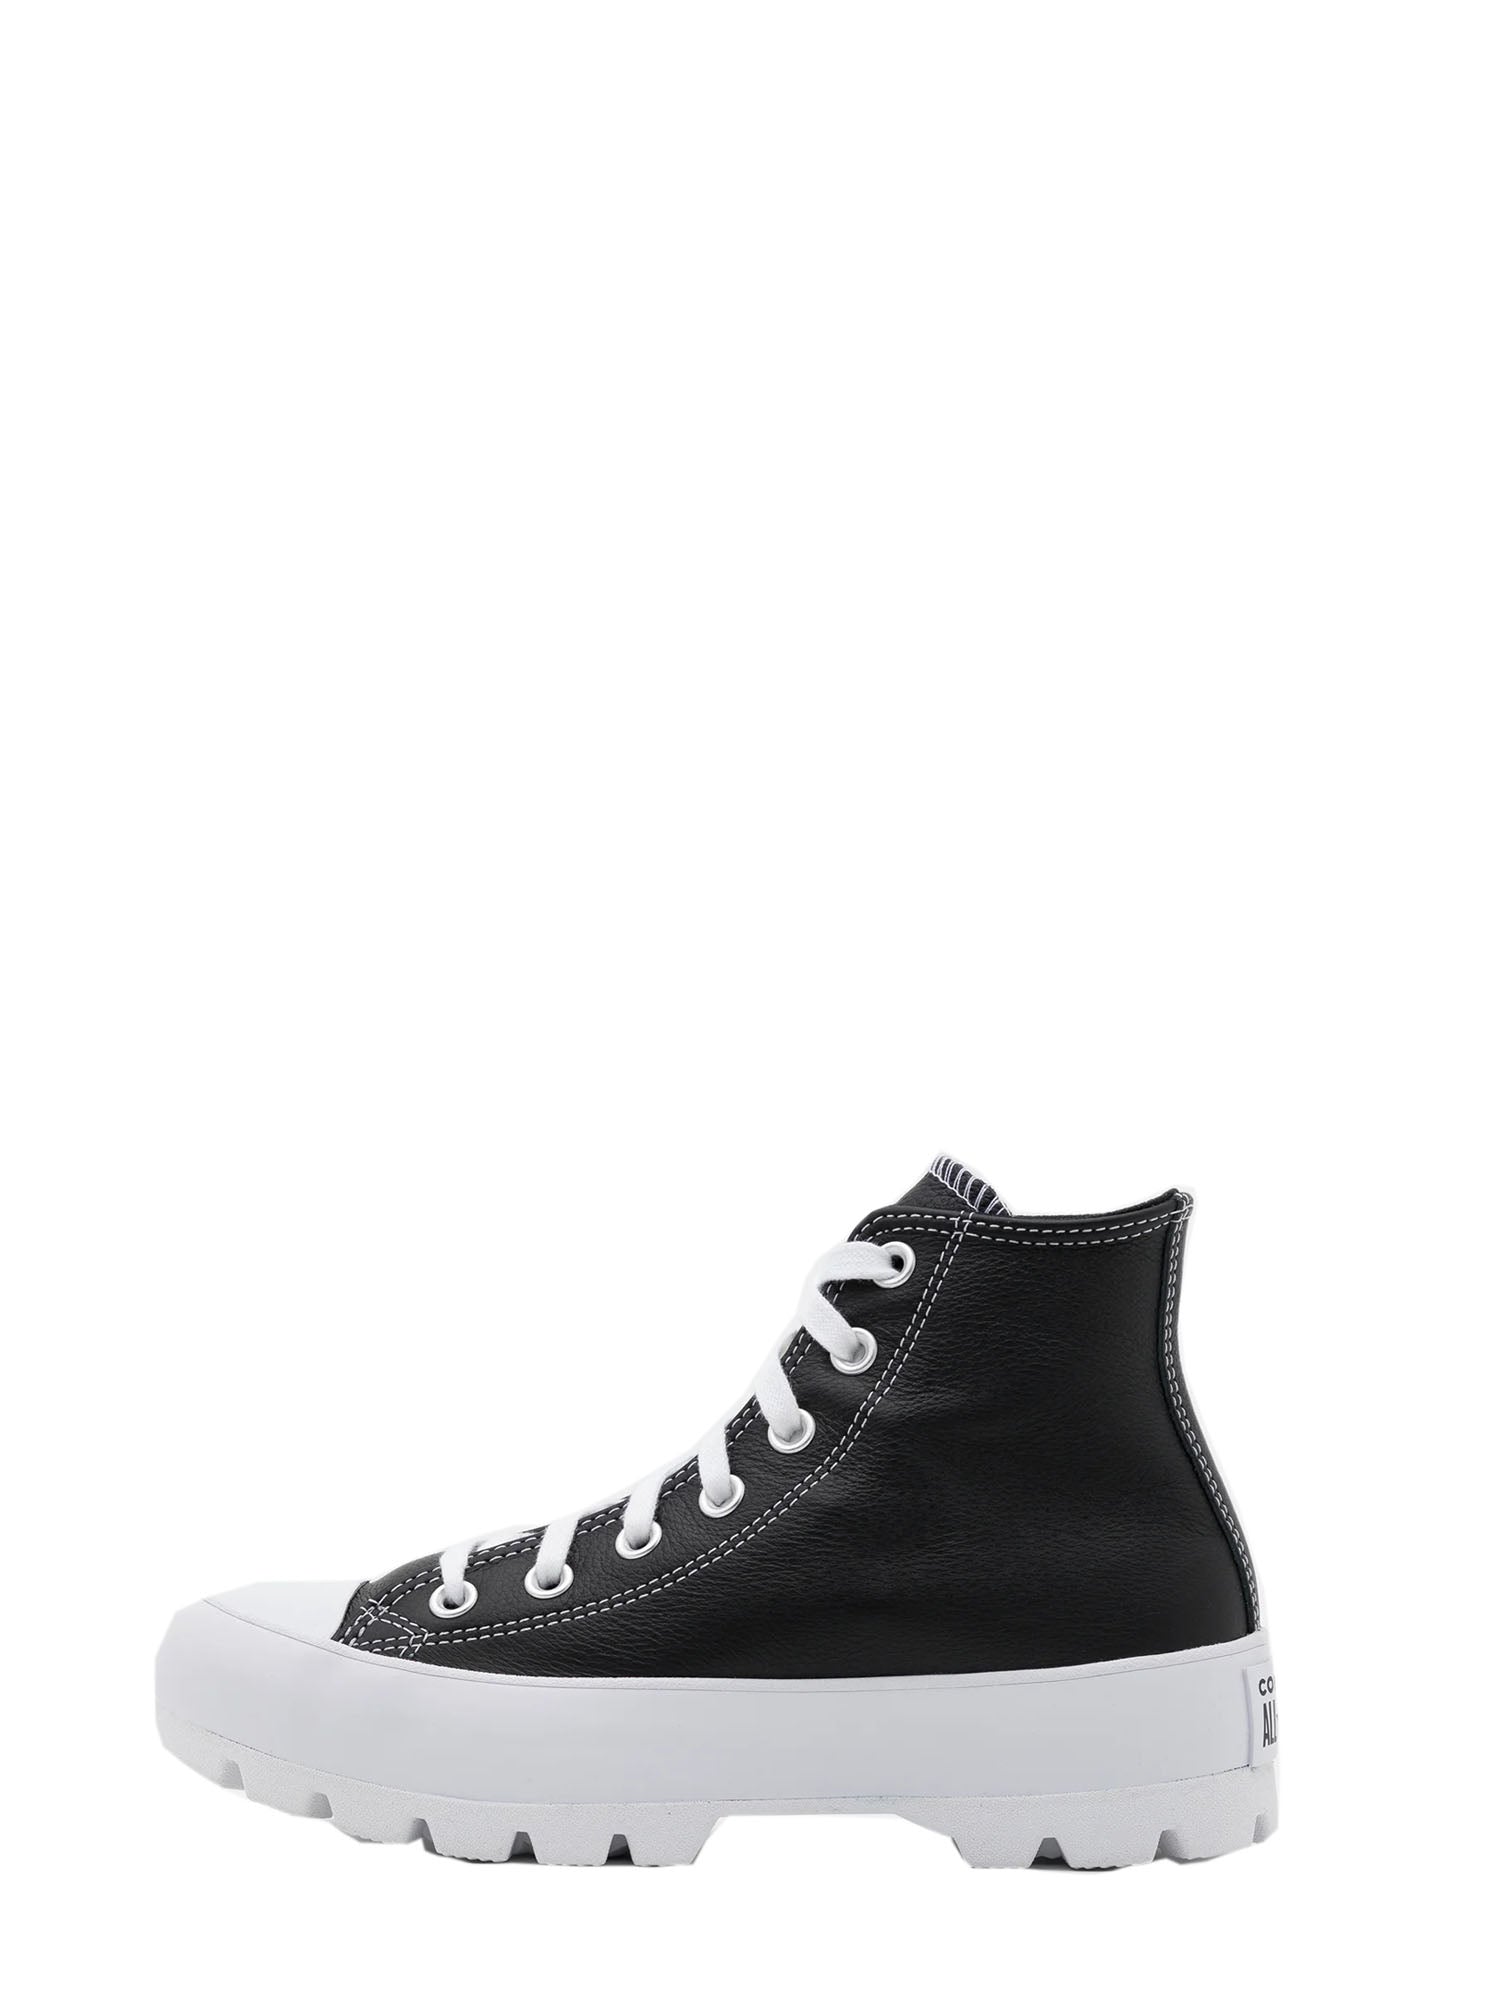 CONVERSE LUGGED LEATHER CHUCK TAYLOR ALL STAR NERO